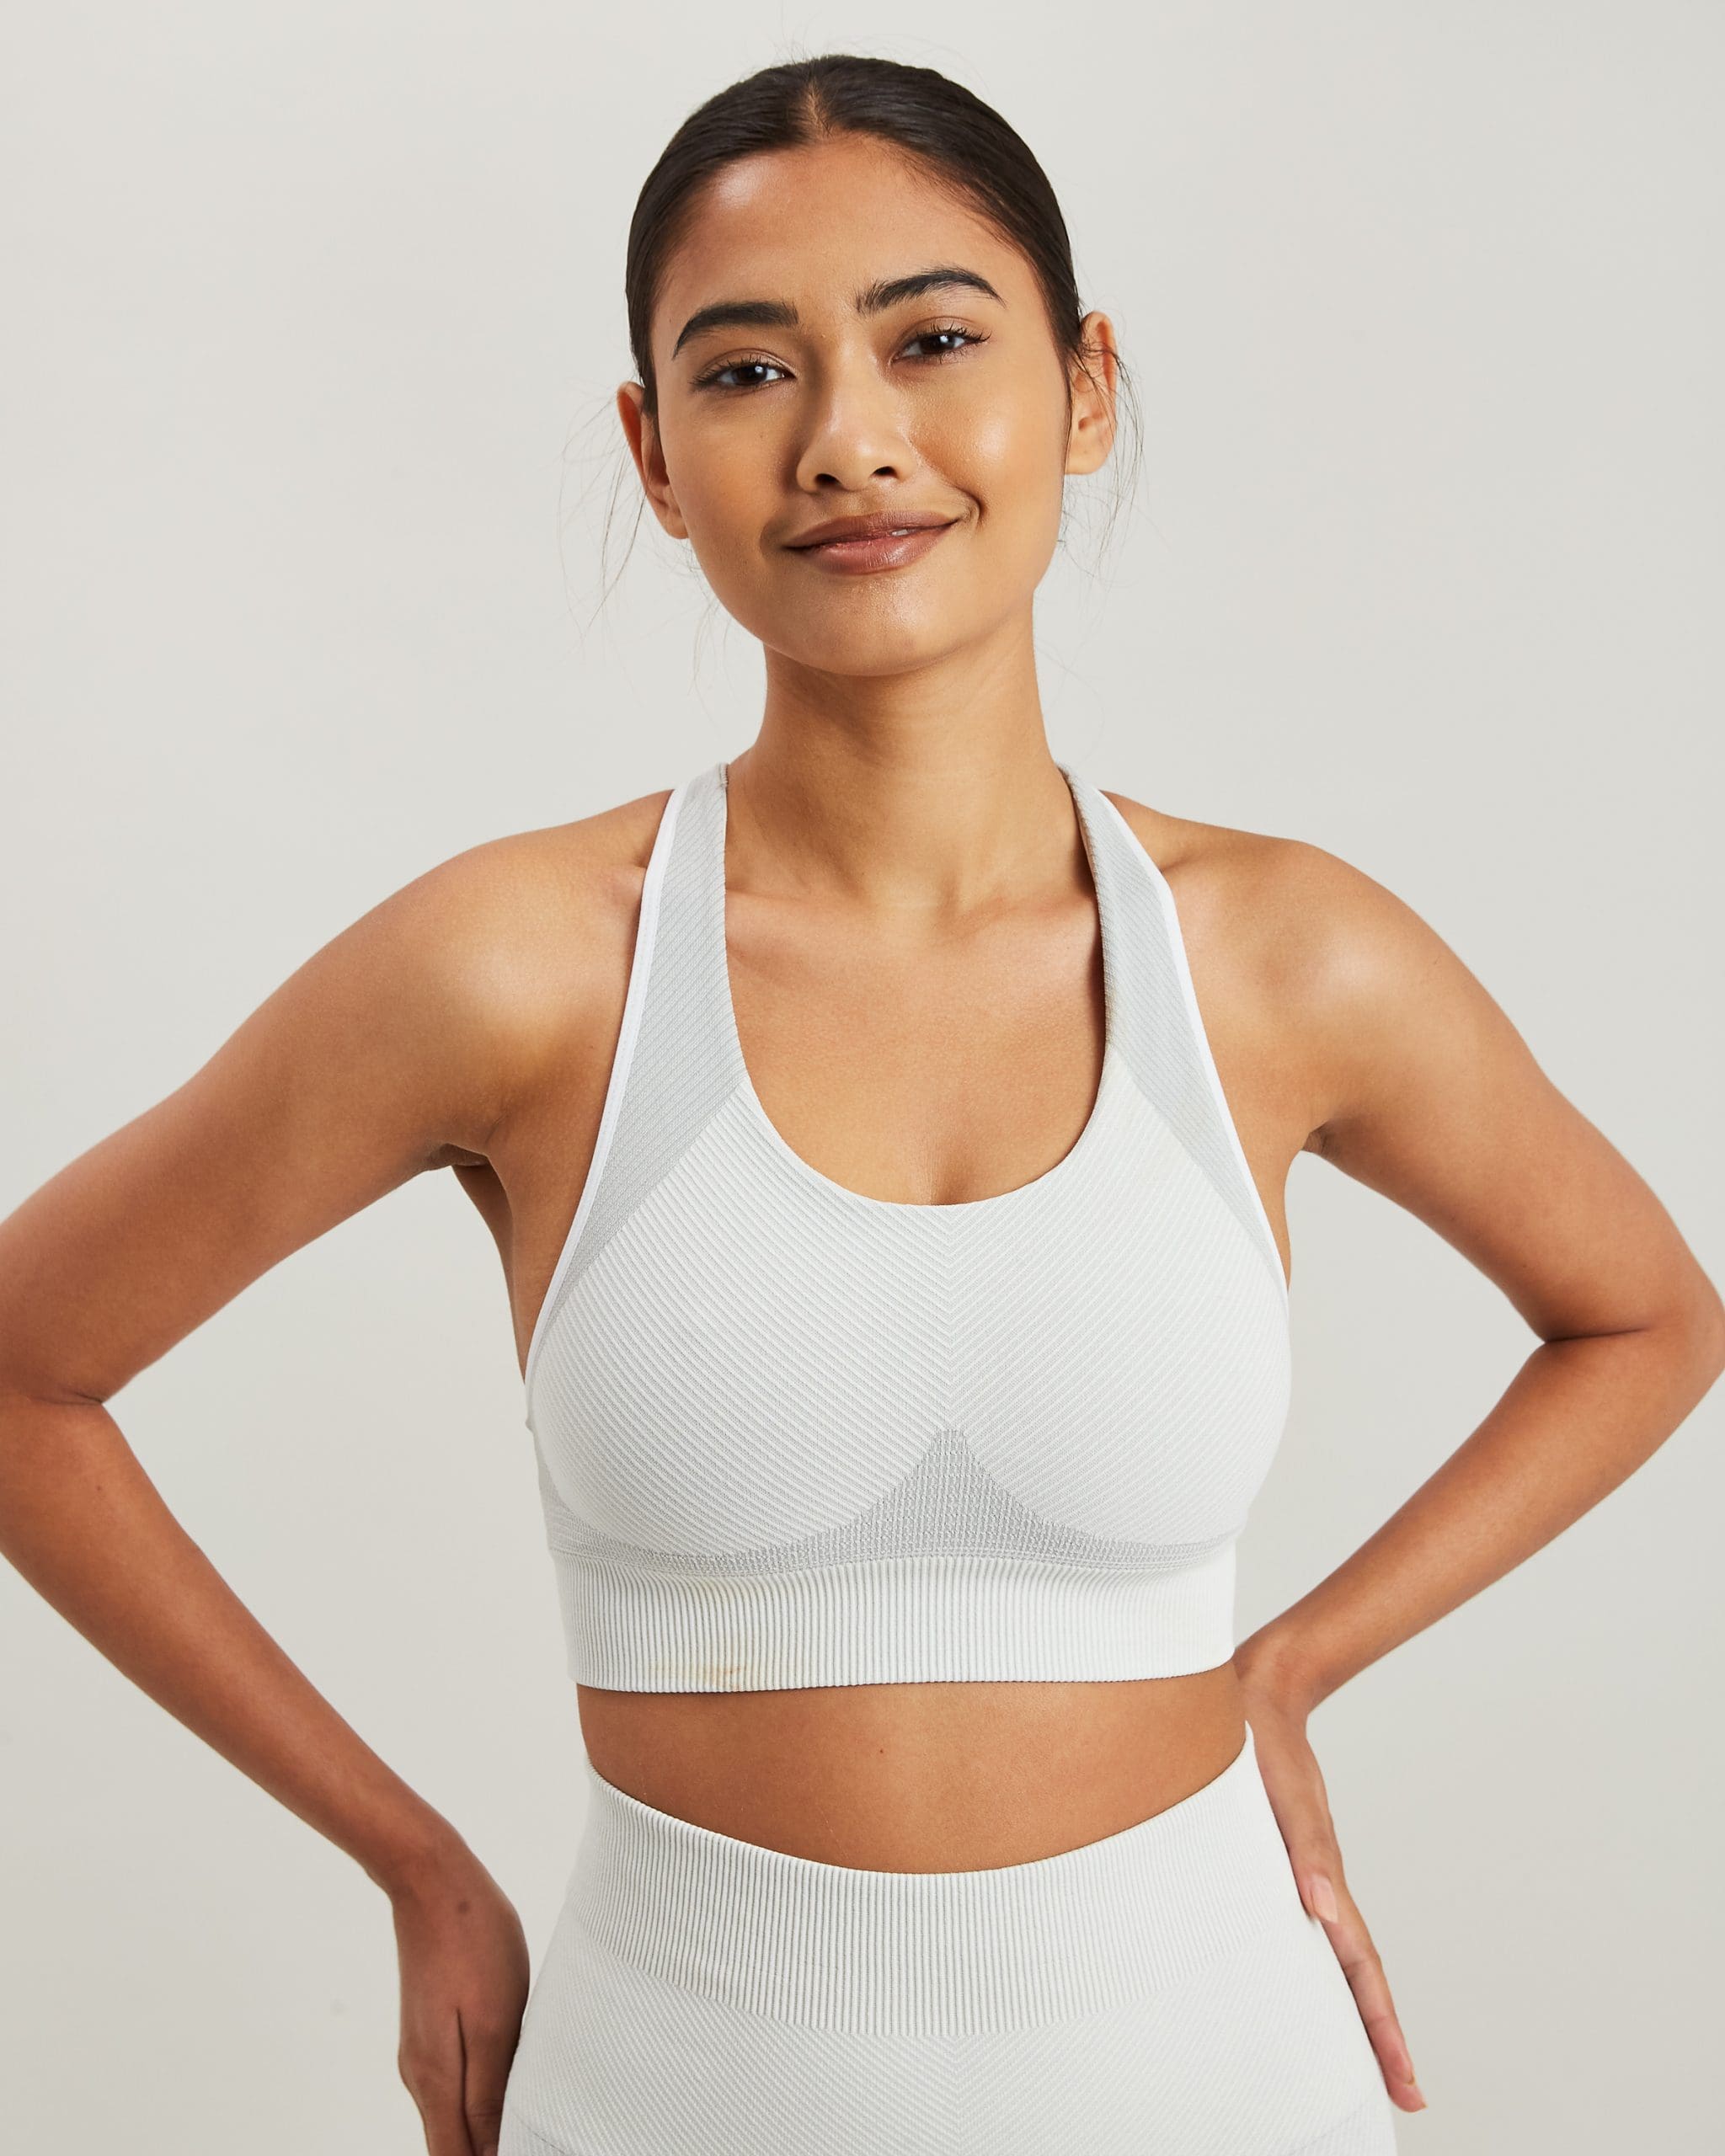 China High Support Stylish Sport Bra Cotton Women's Bra For Exercise  factory and manufacturers